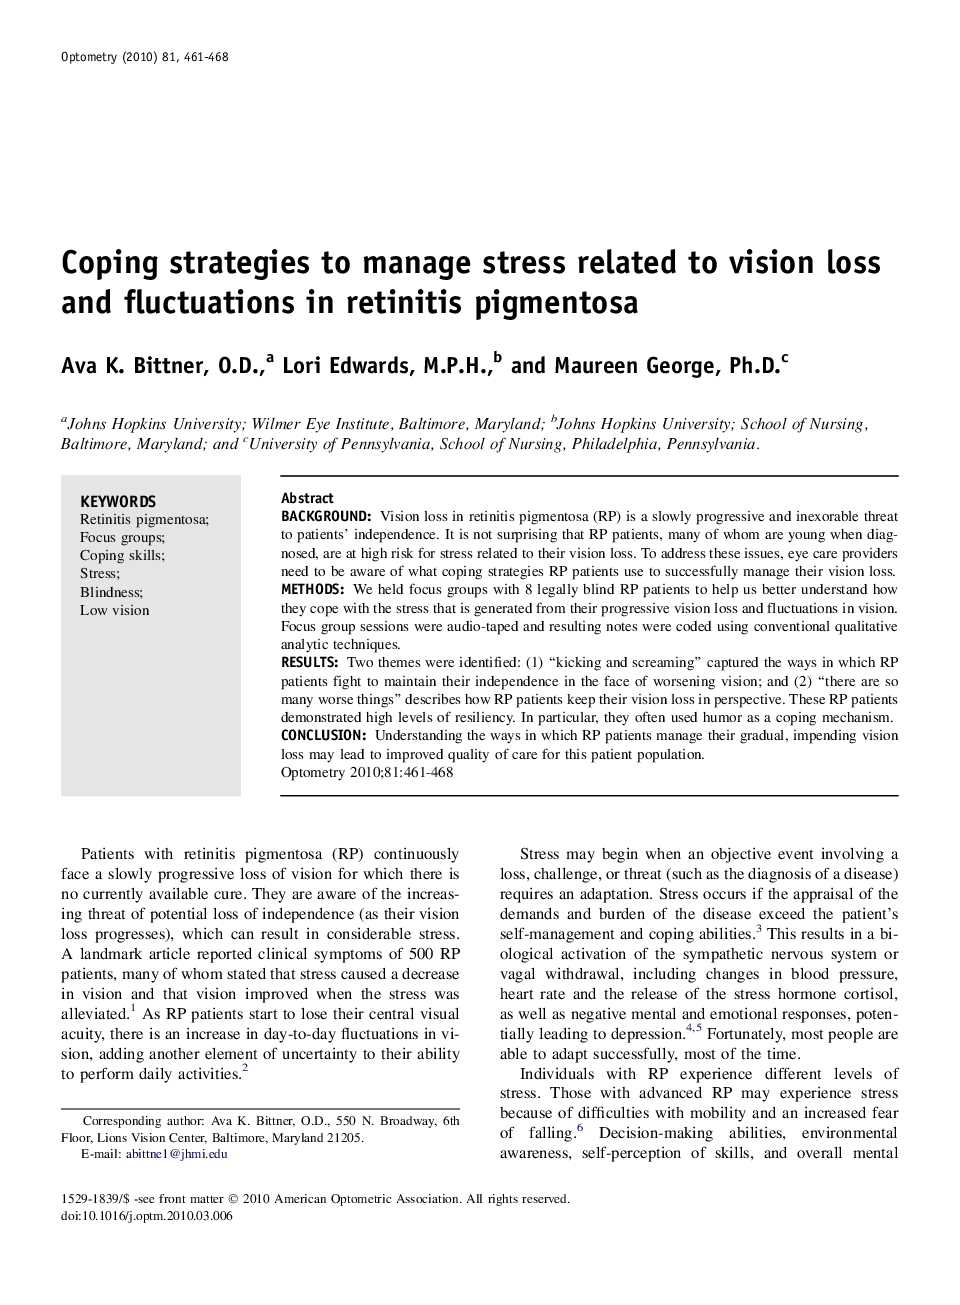 Coping strategies to manage stress related to vision loss and fluctuations in retinitis pigmentosa